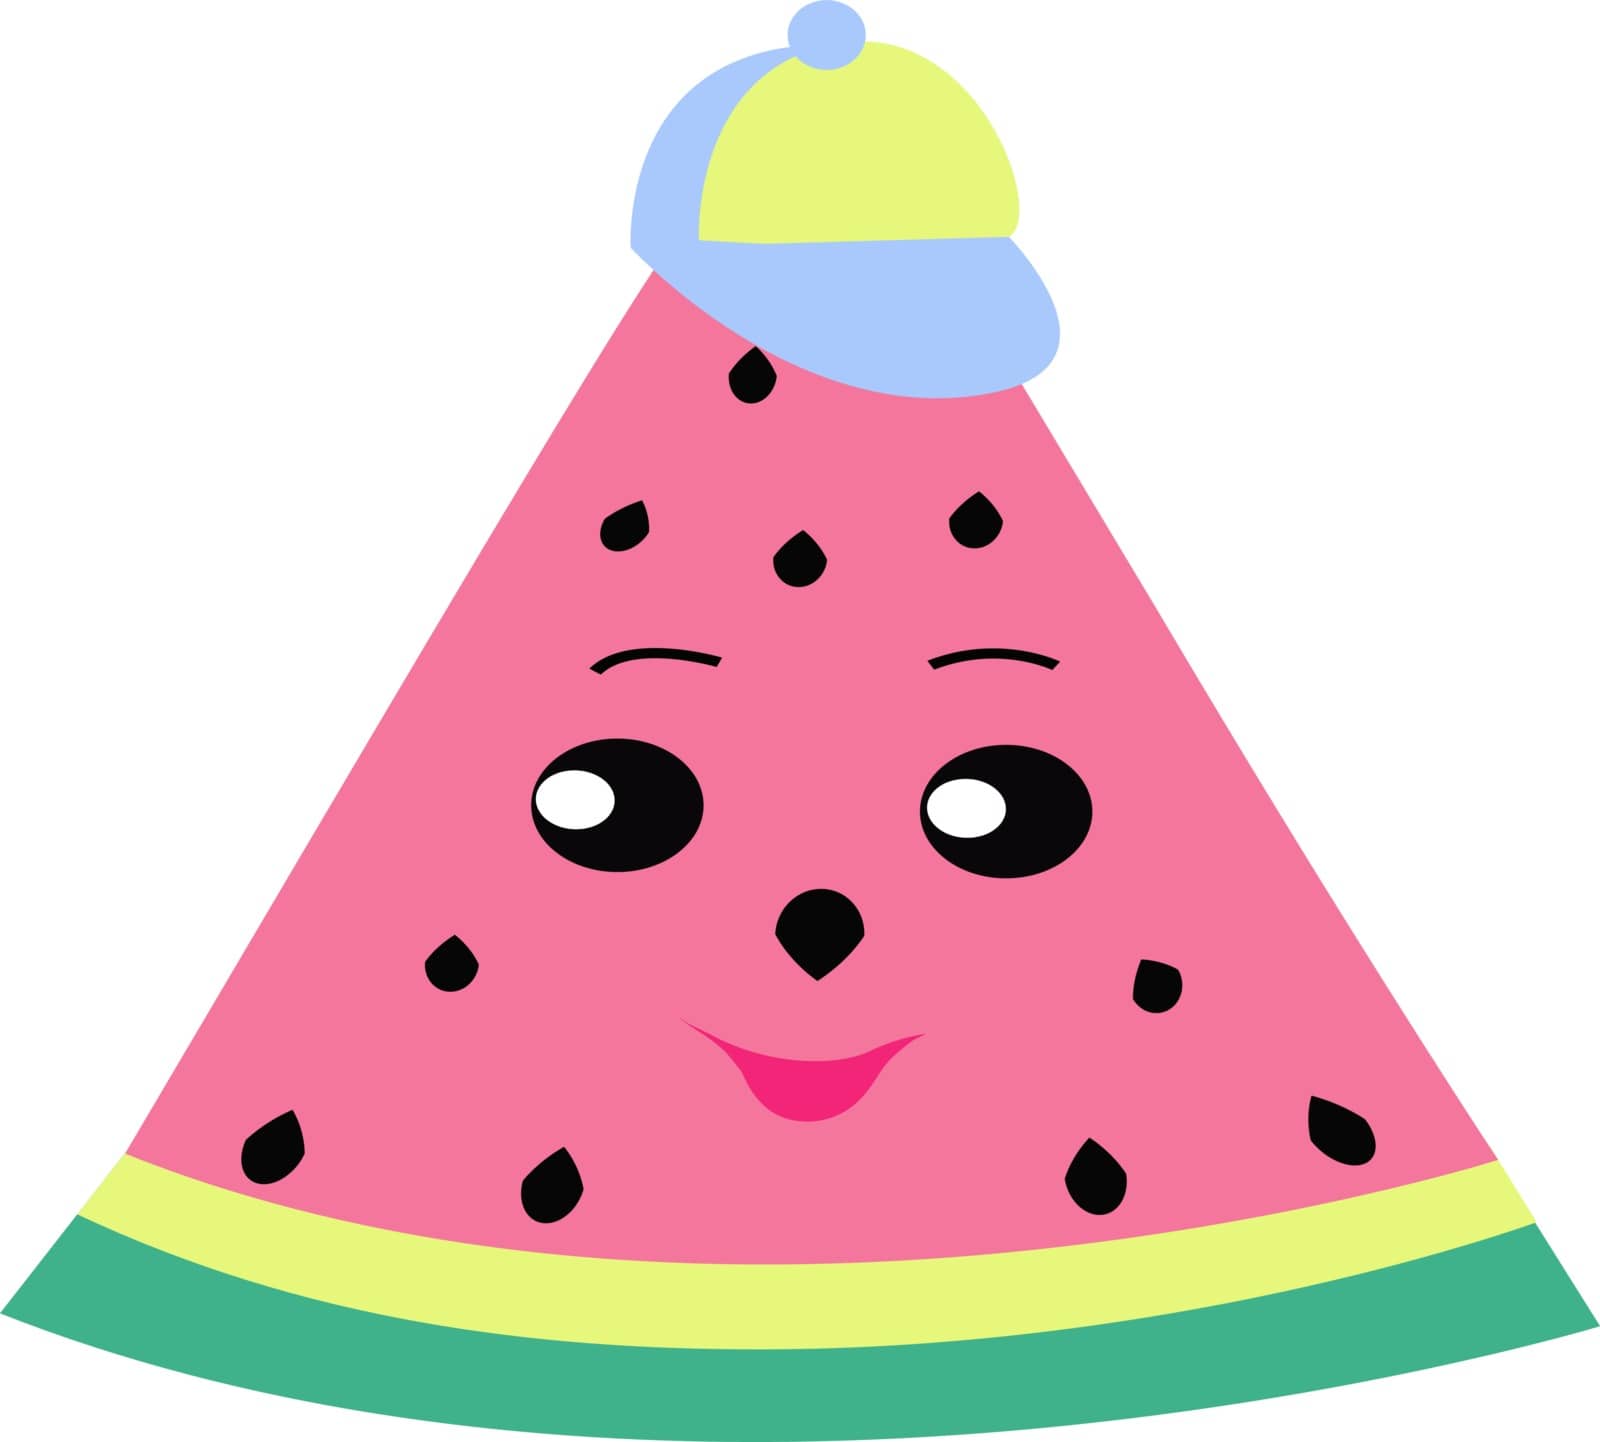 Watermelon piece, illustration, vector on white background. by Morphart